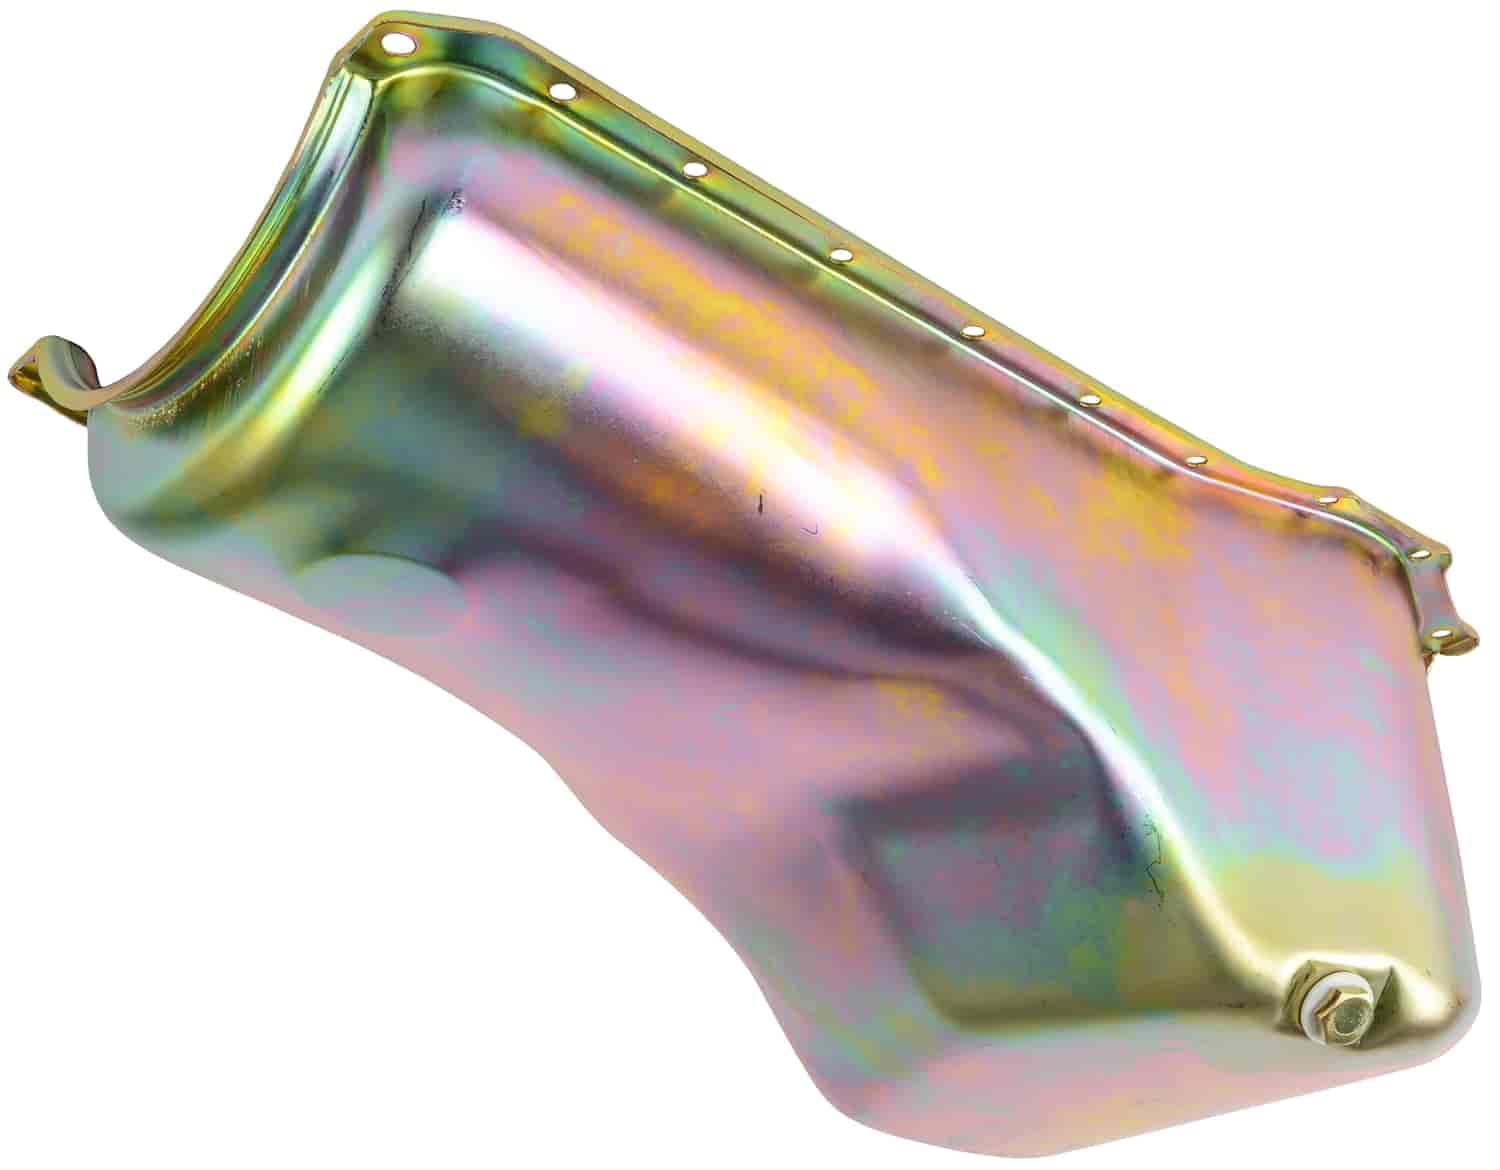 Stock-Style Replacement Oil Pan for 1970-1979 Big Block Ford 351C/M, 400 [Gold Zinc]